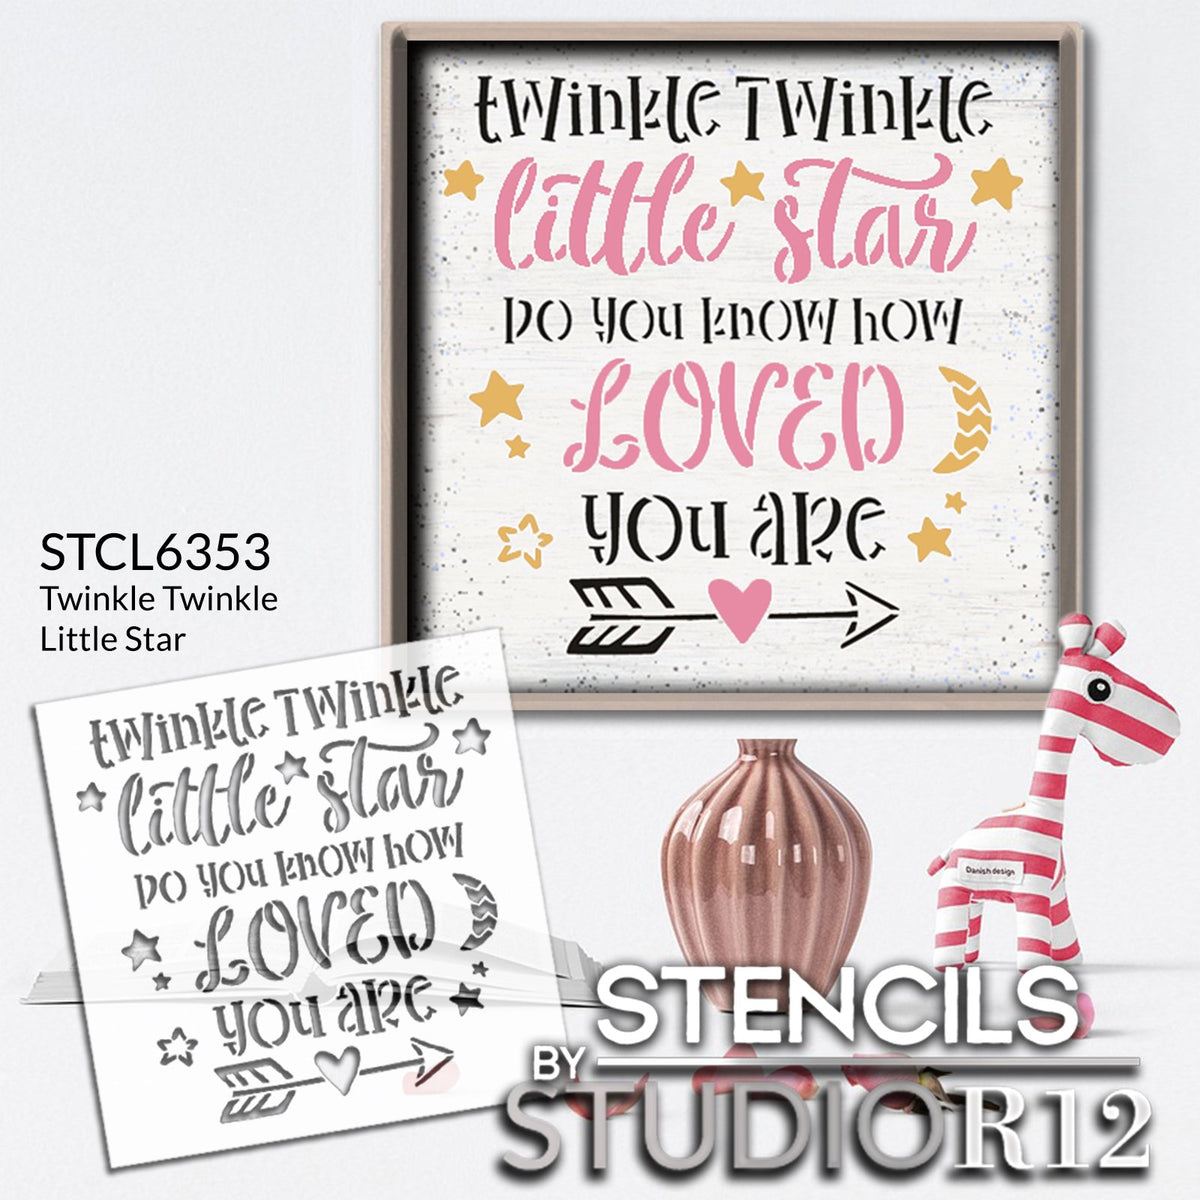 Space Stencils Drawing Stencils for Kids Stencil Set of 6 Plastic Stencils Drawing for Kids Paint Stencils Stencil Kit Art Stencils Chalkboard